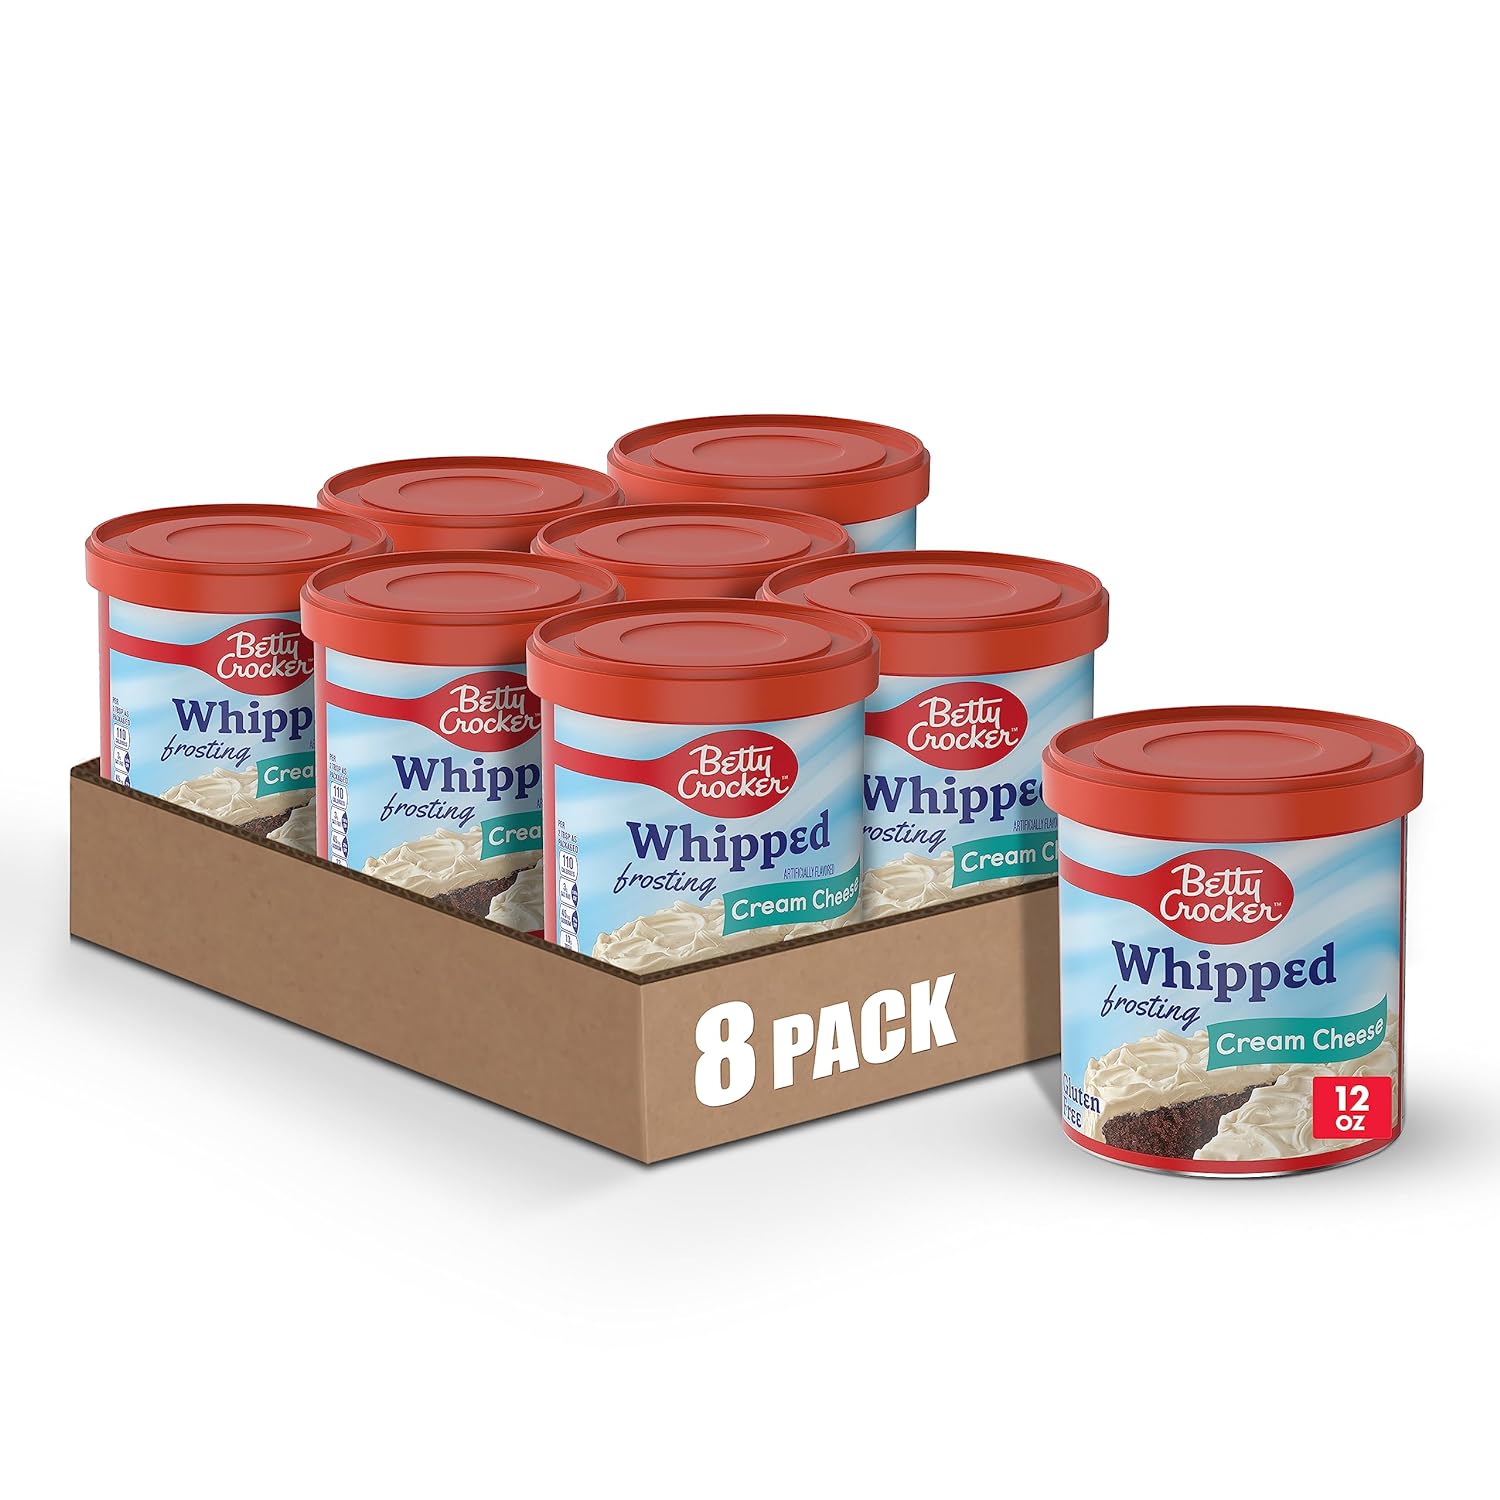 Betty Crocker Gluten Free Whipped Cream Cheese Frosting, 12 oz. (Pack of 8)